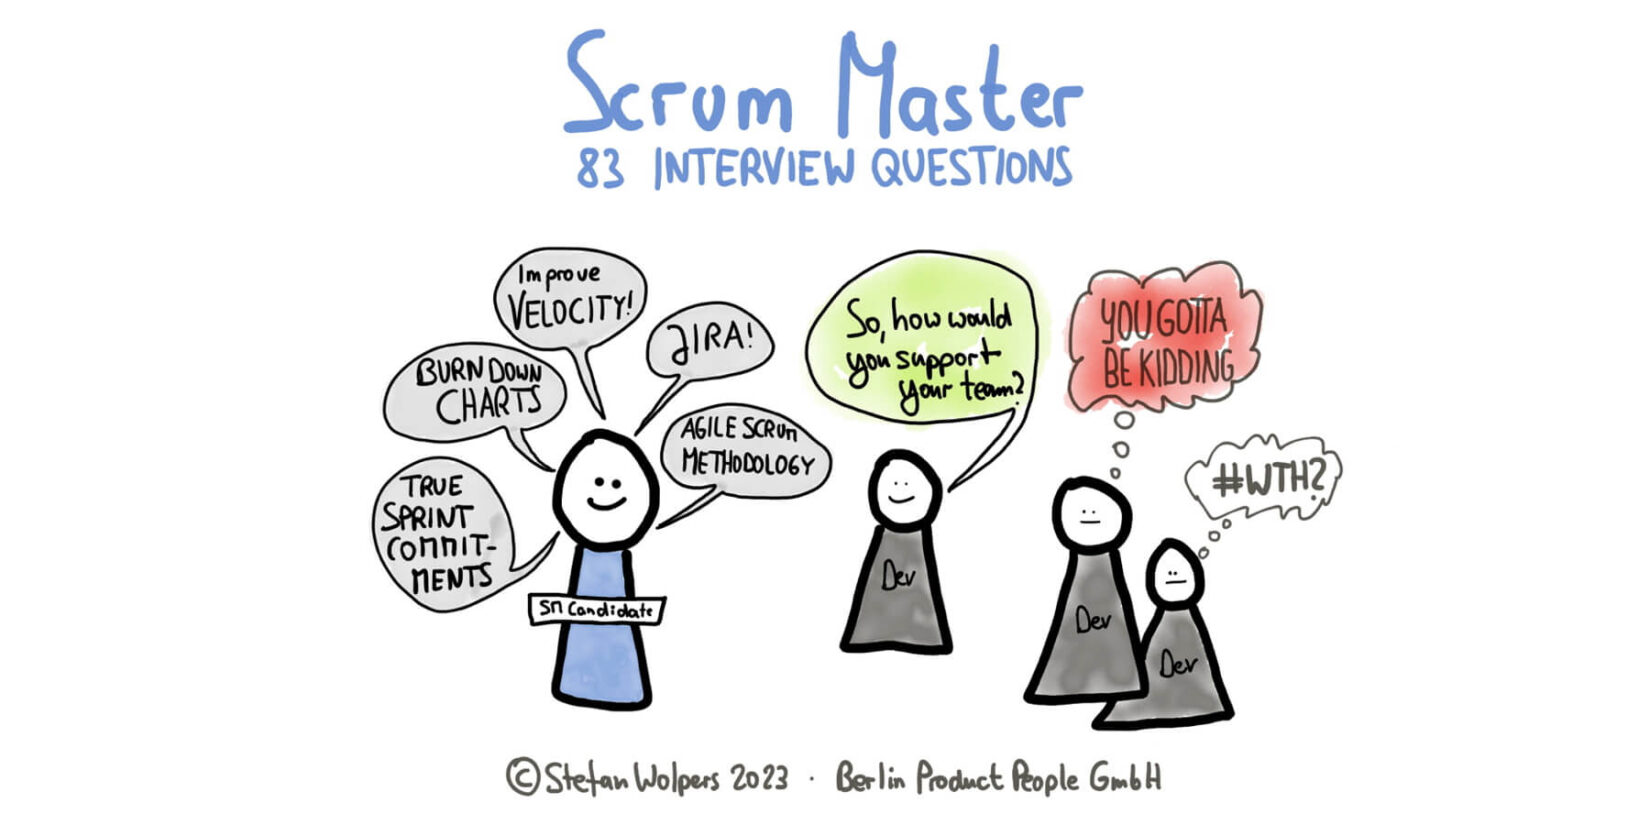 Download now: 83 Scrum Master Interview Questions on Creating Value with Scrum — Age-of-Product.com